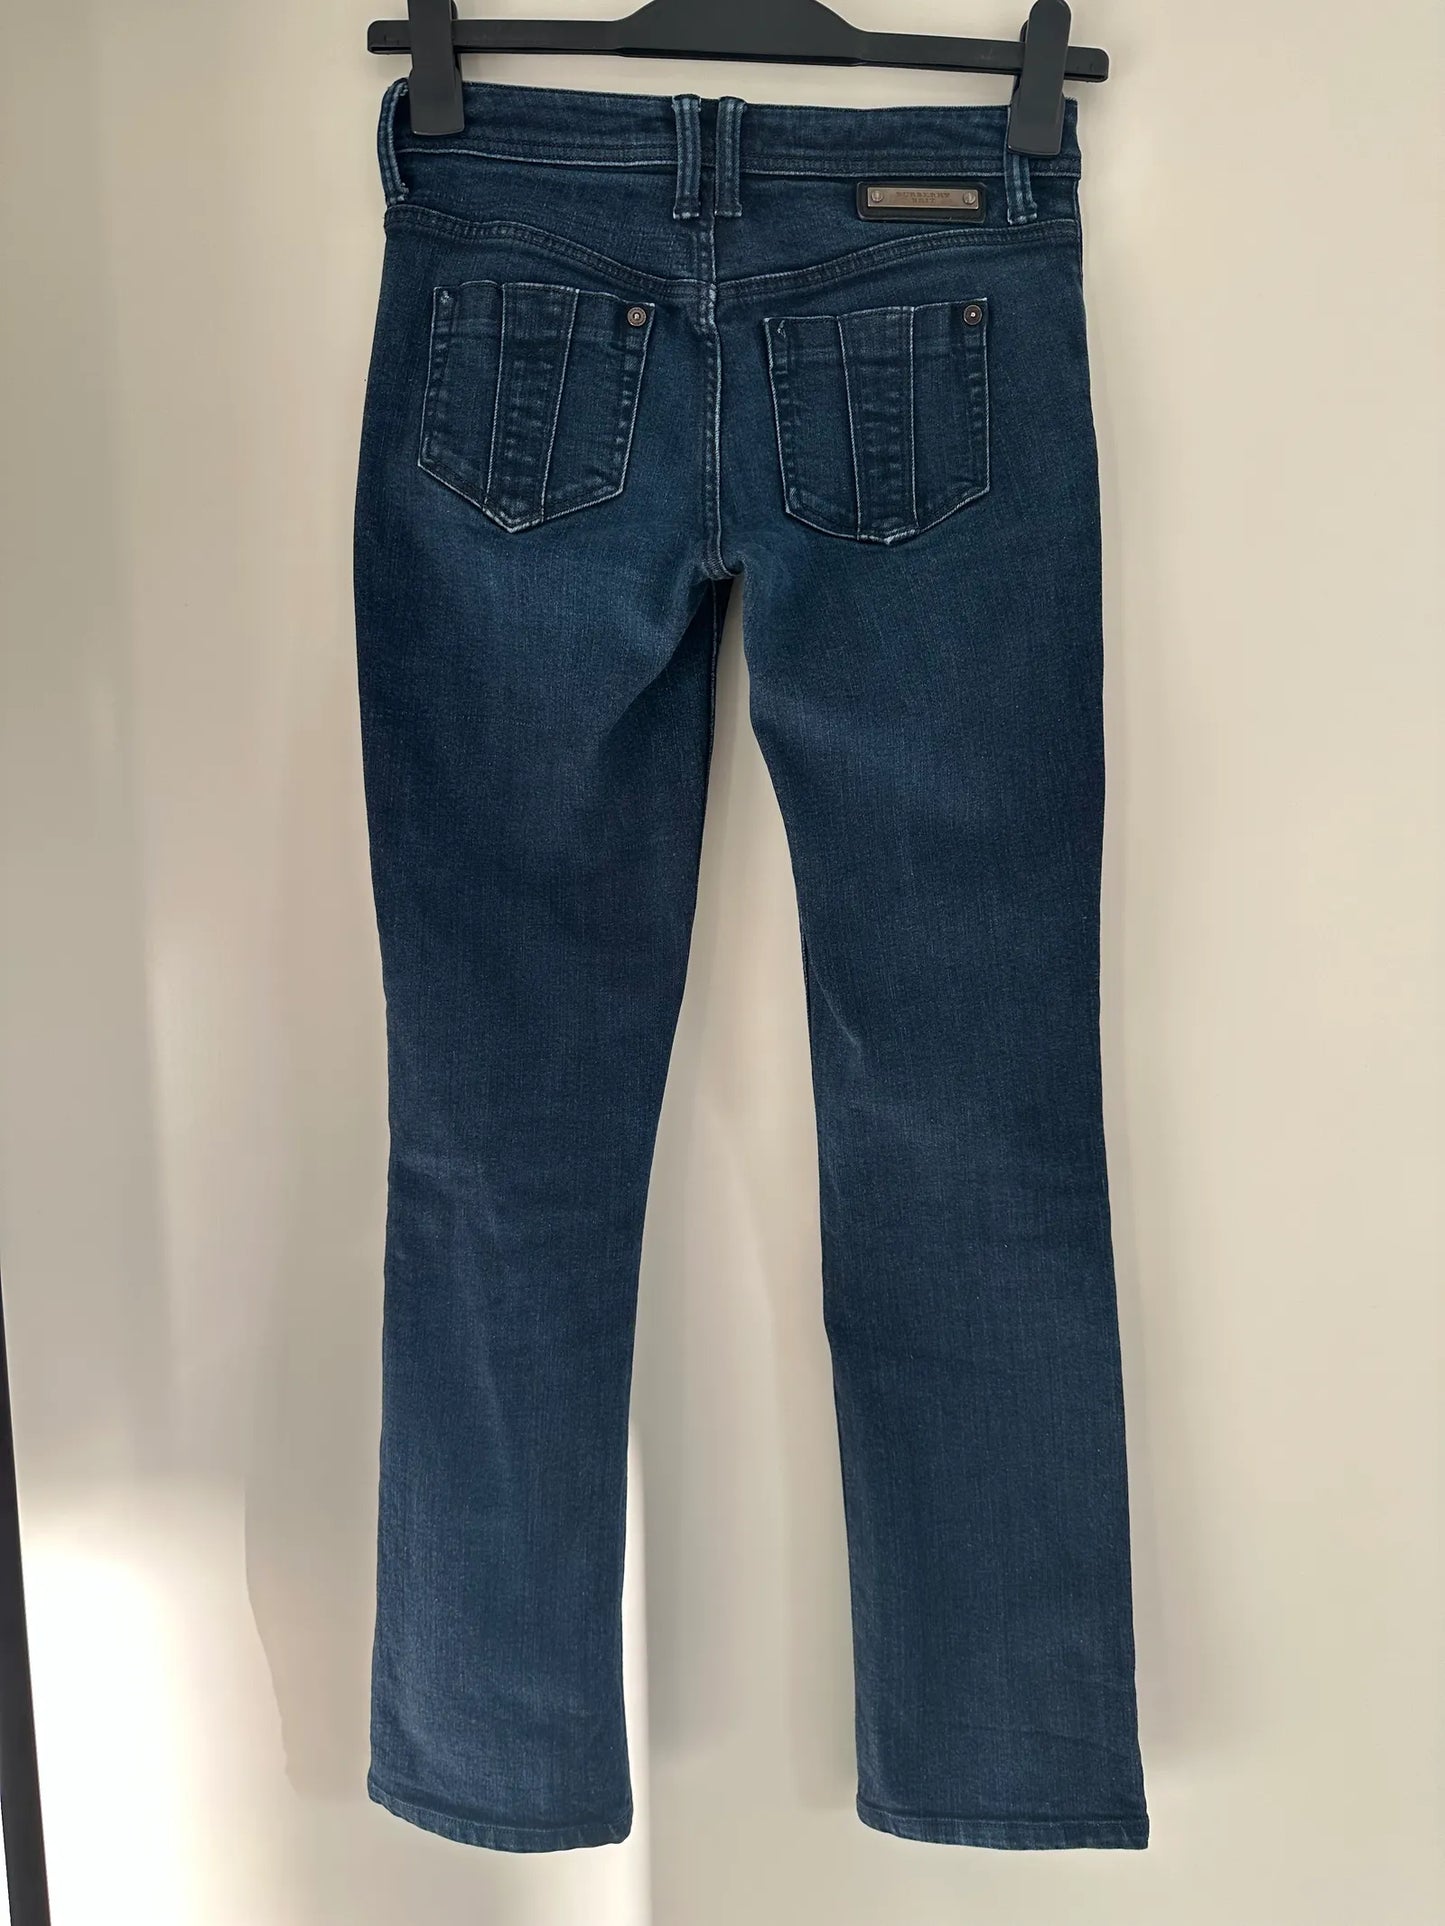 Burberry-jeans